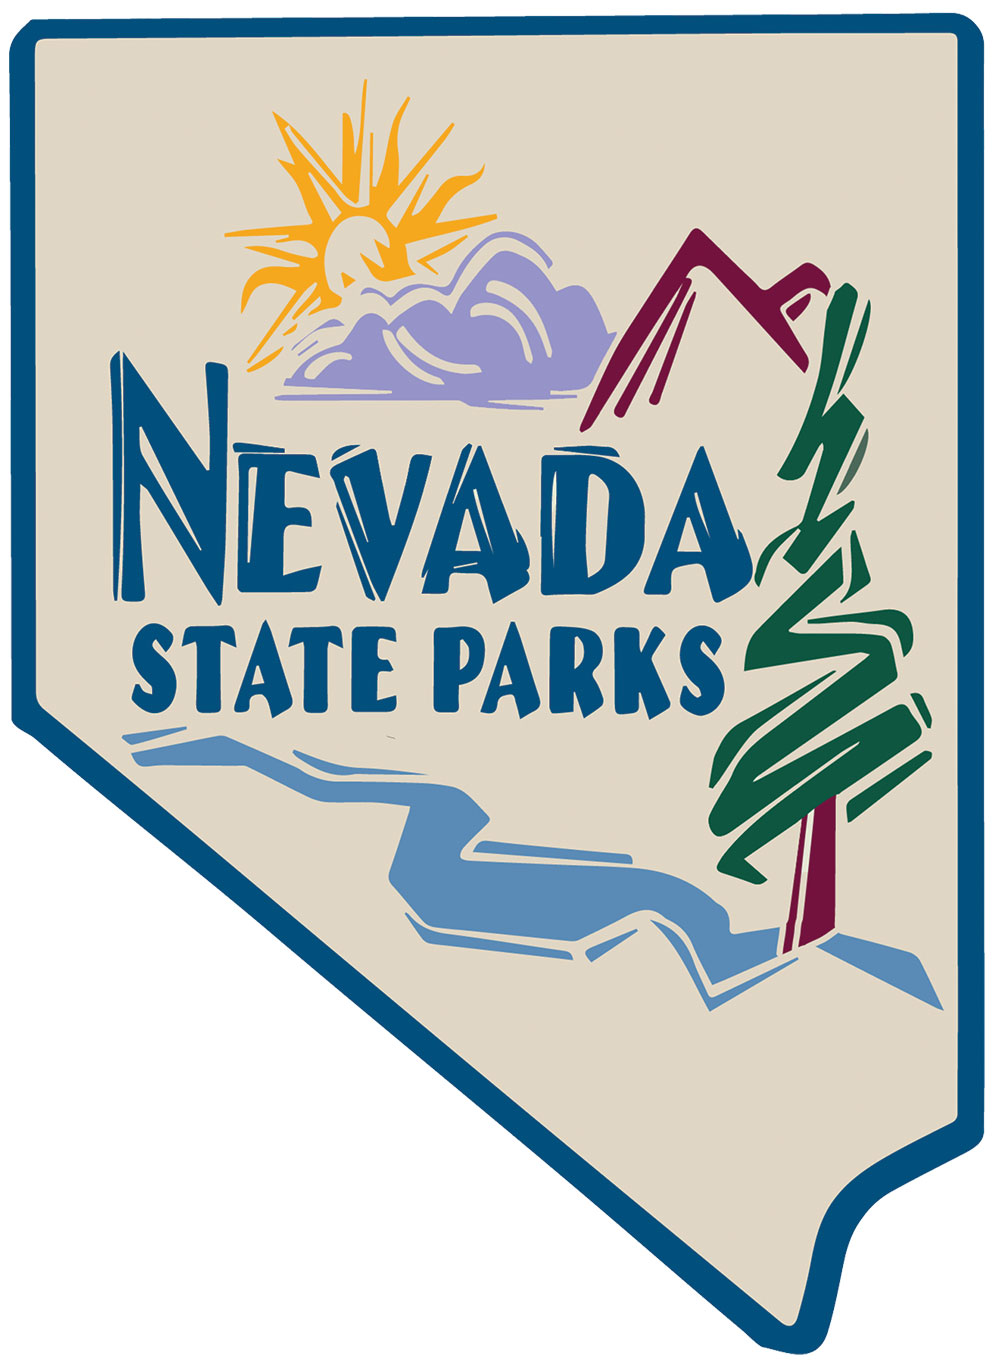 Nevada State Parks logo, in the shape of Nevada, with stylized sun, mountains, pine tree and river.